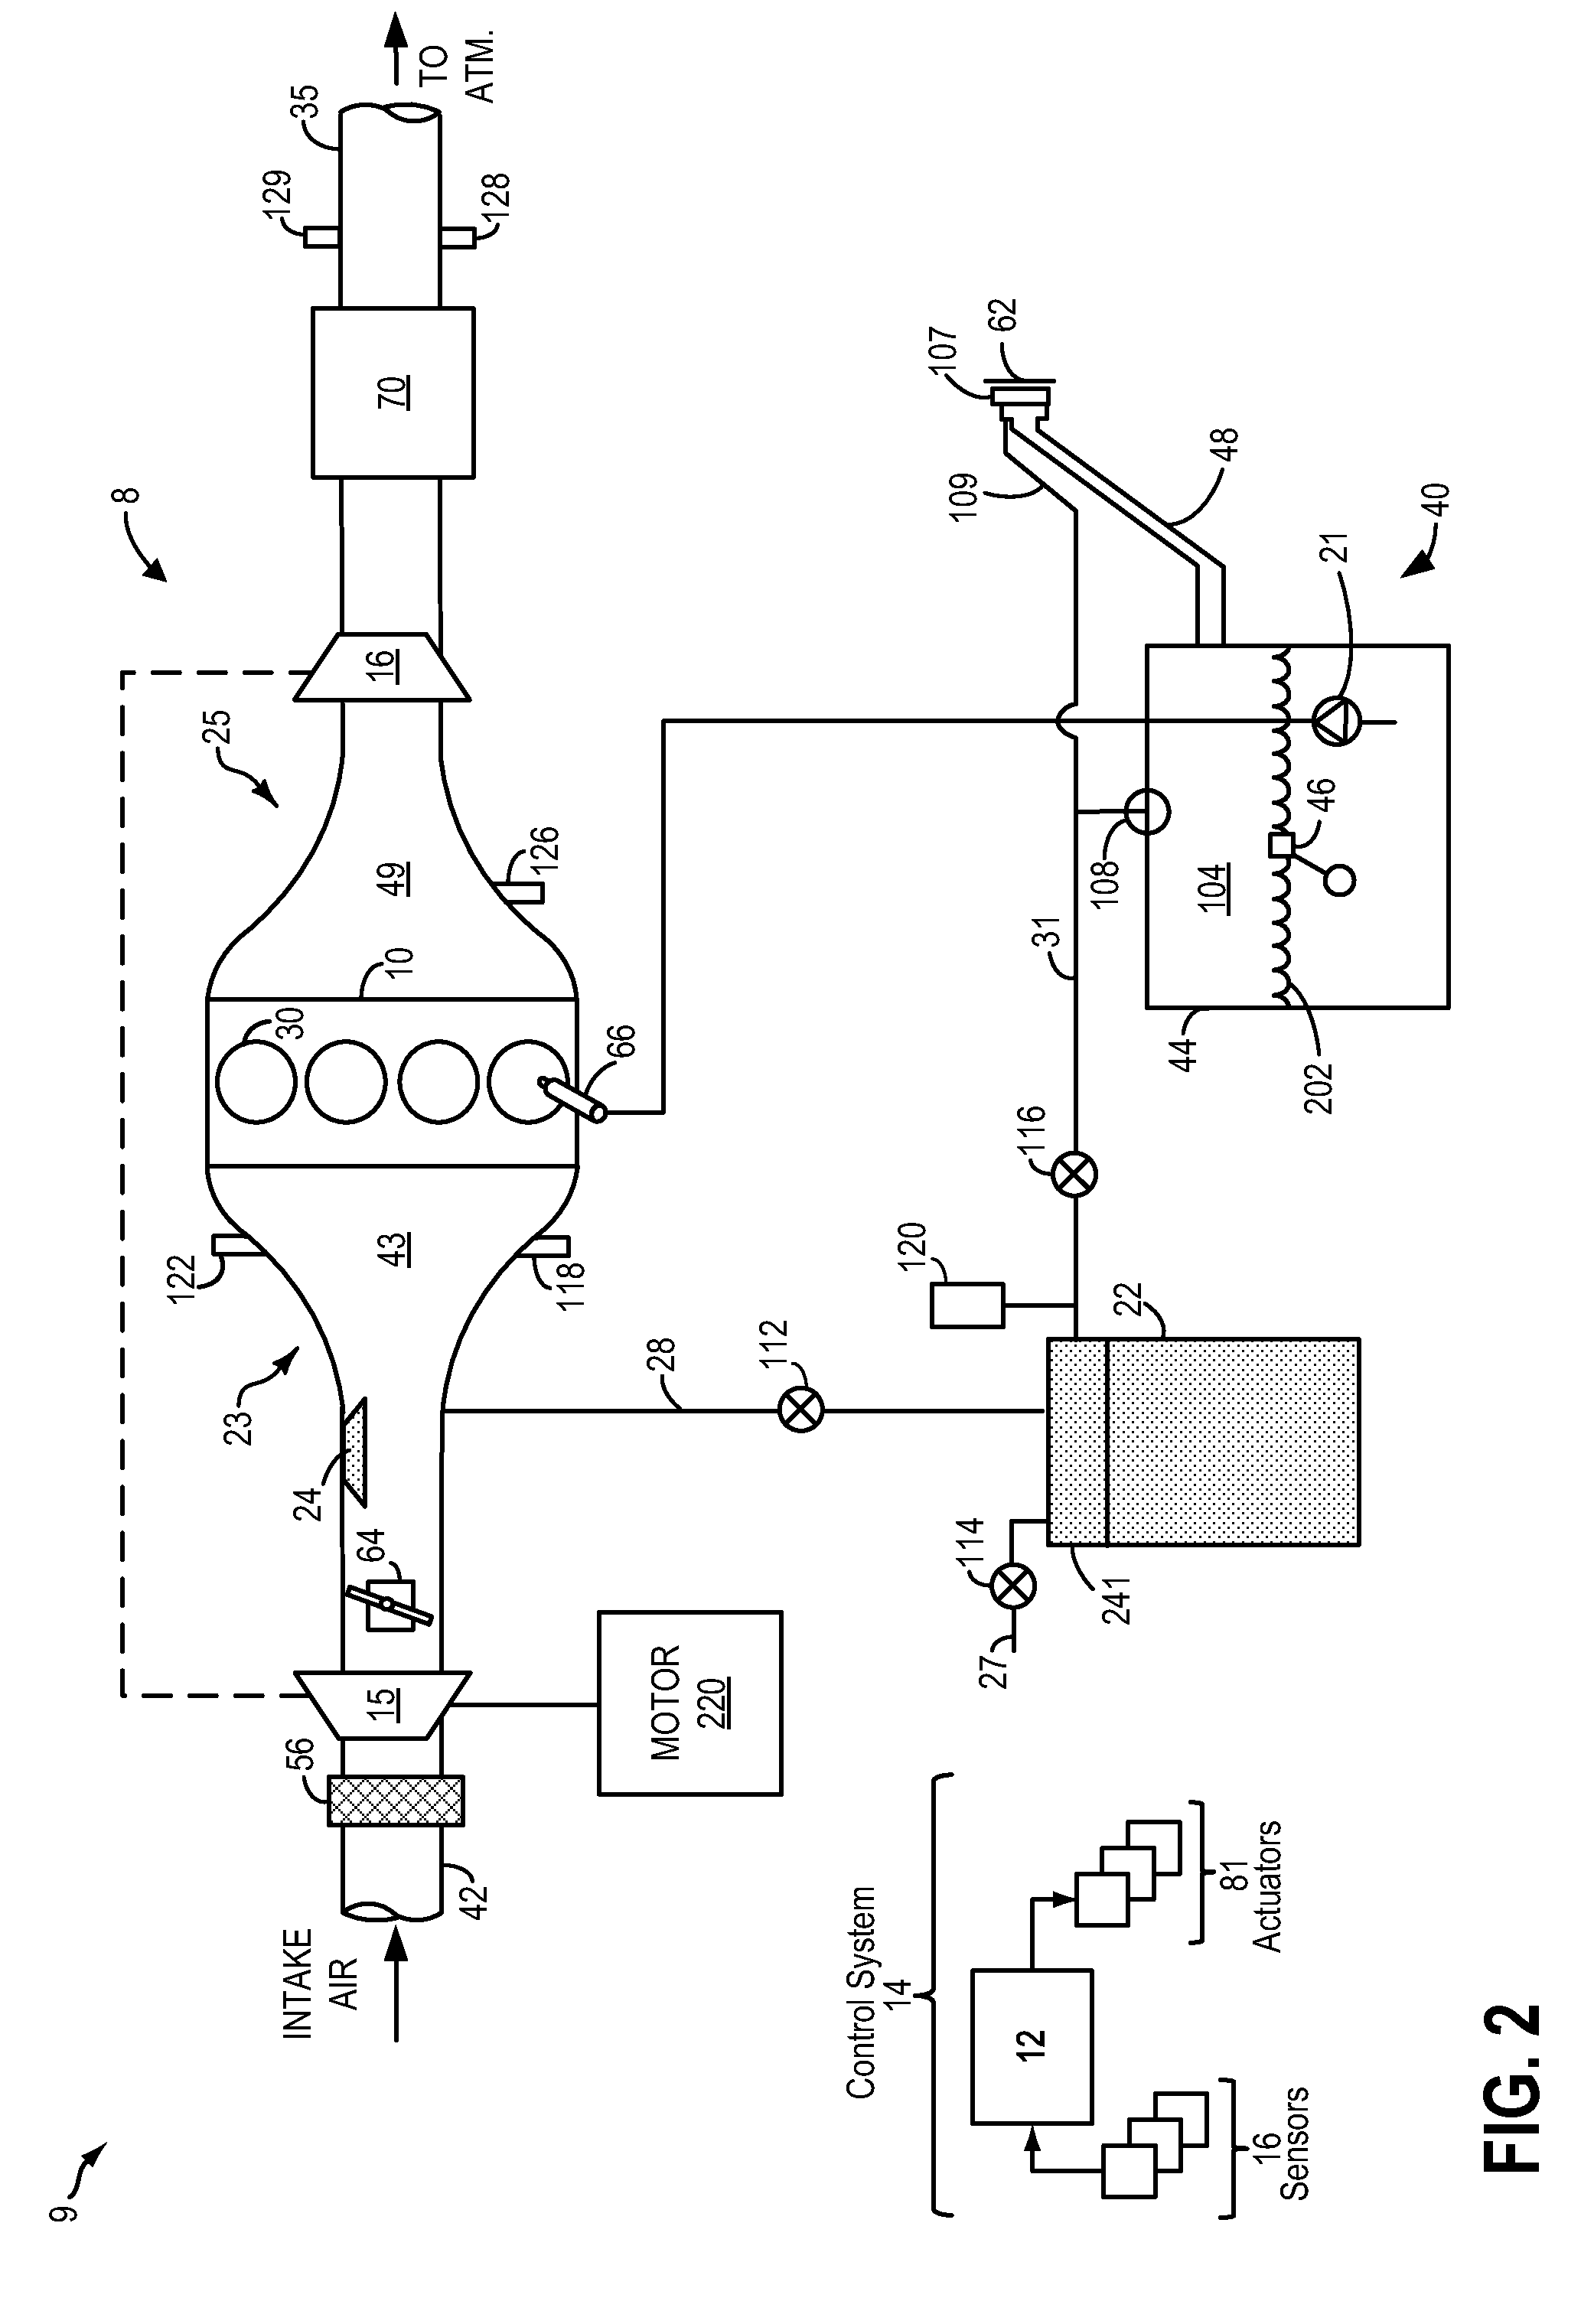 Method for purging of air intake system hydrocarbon trap